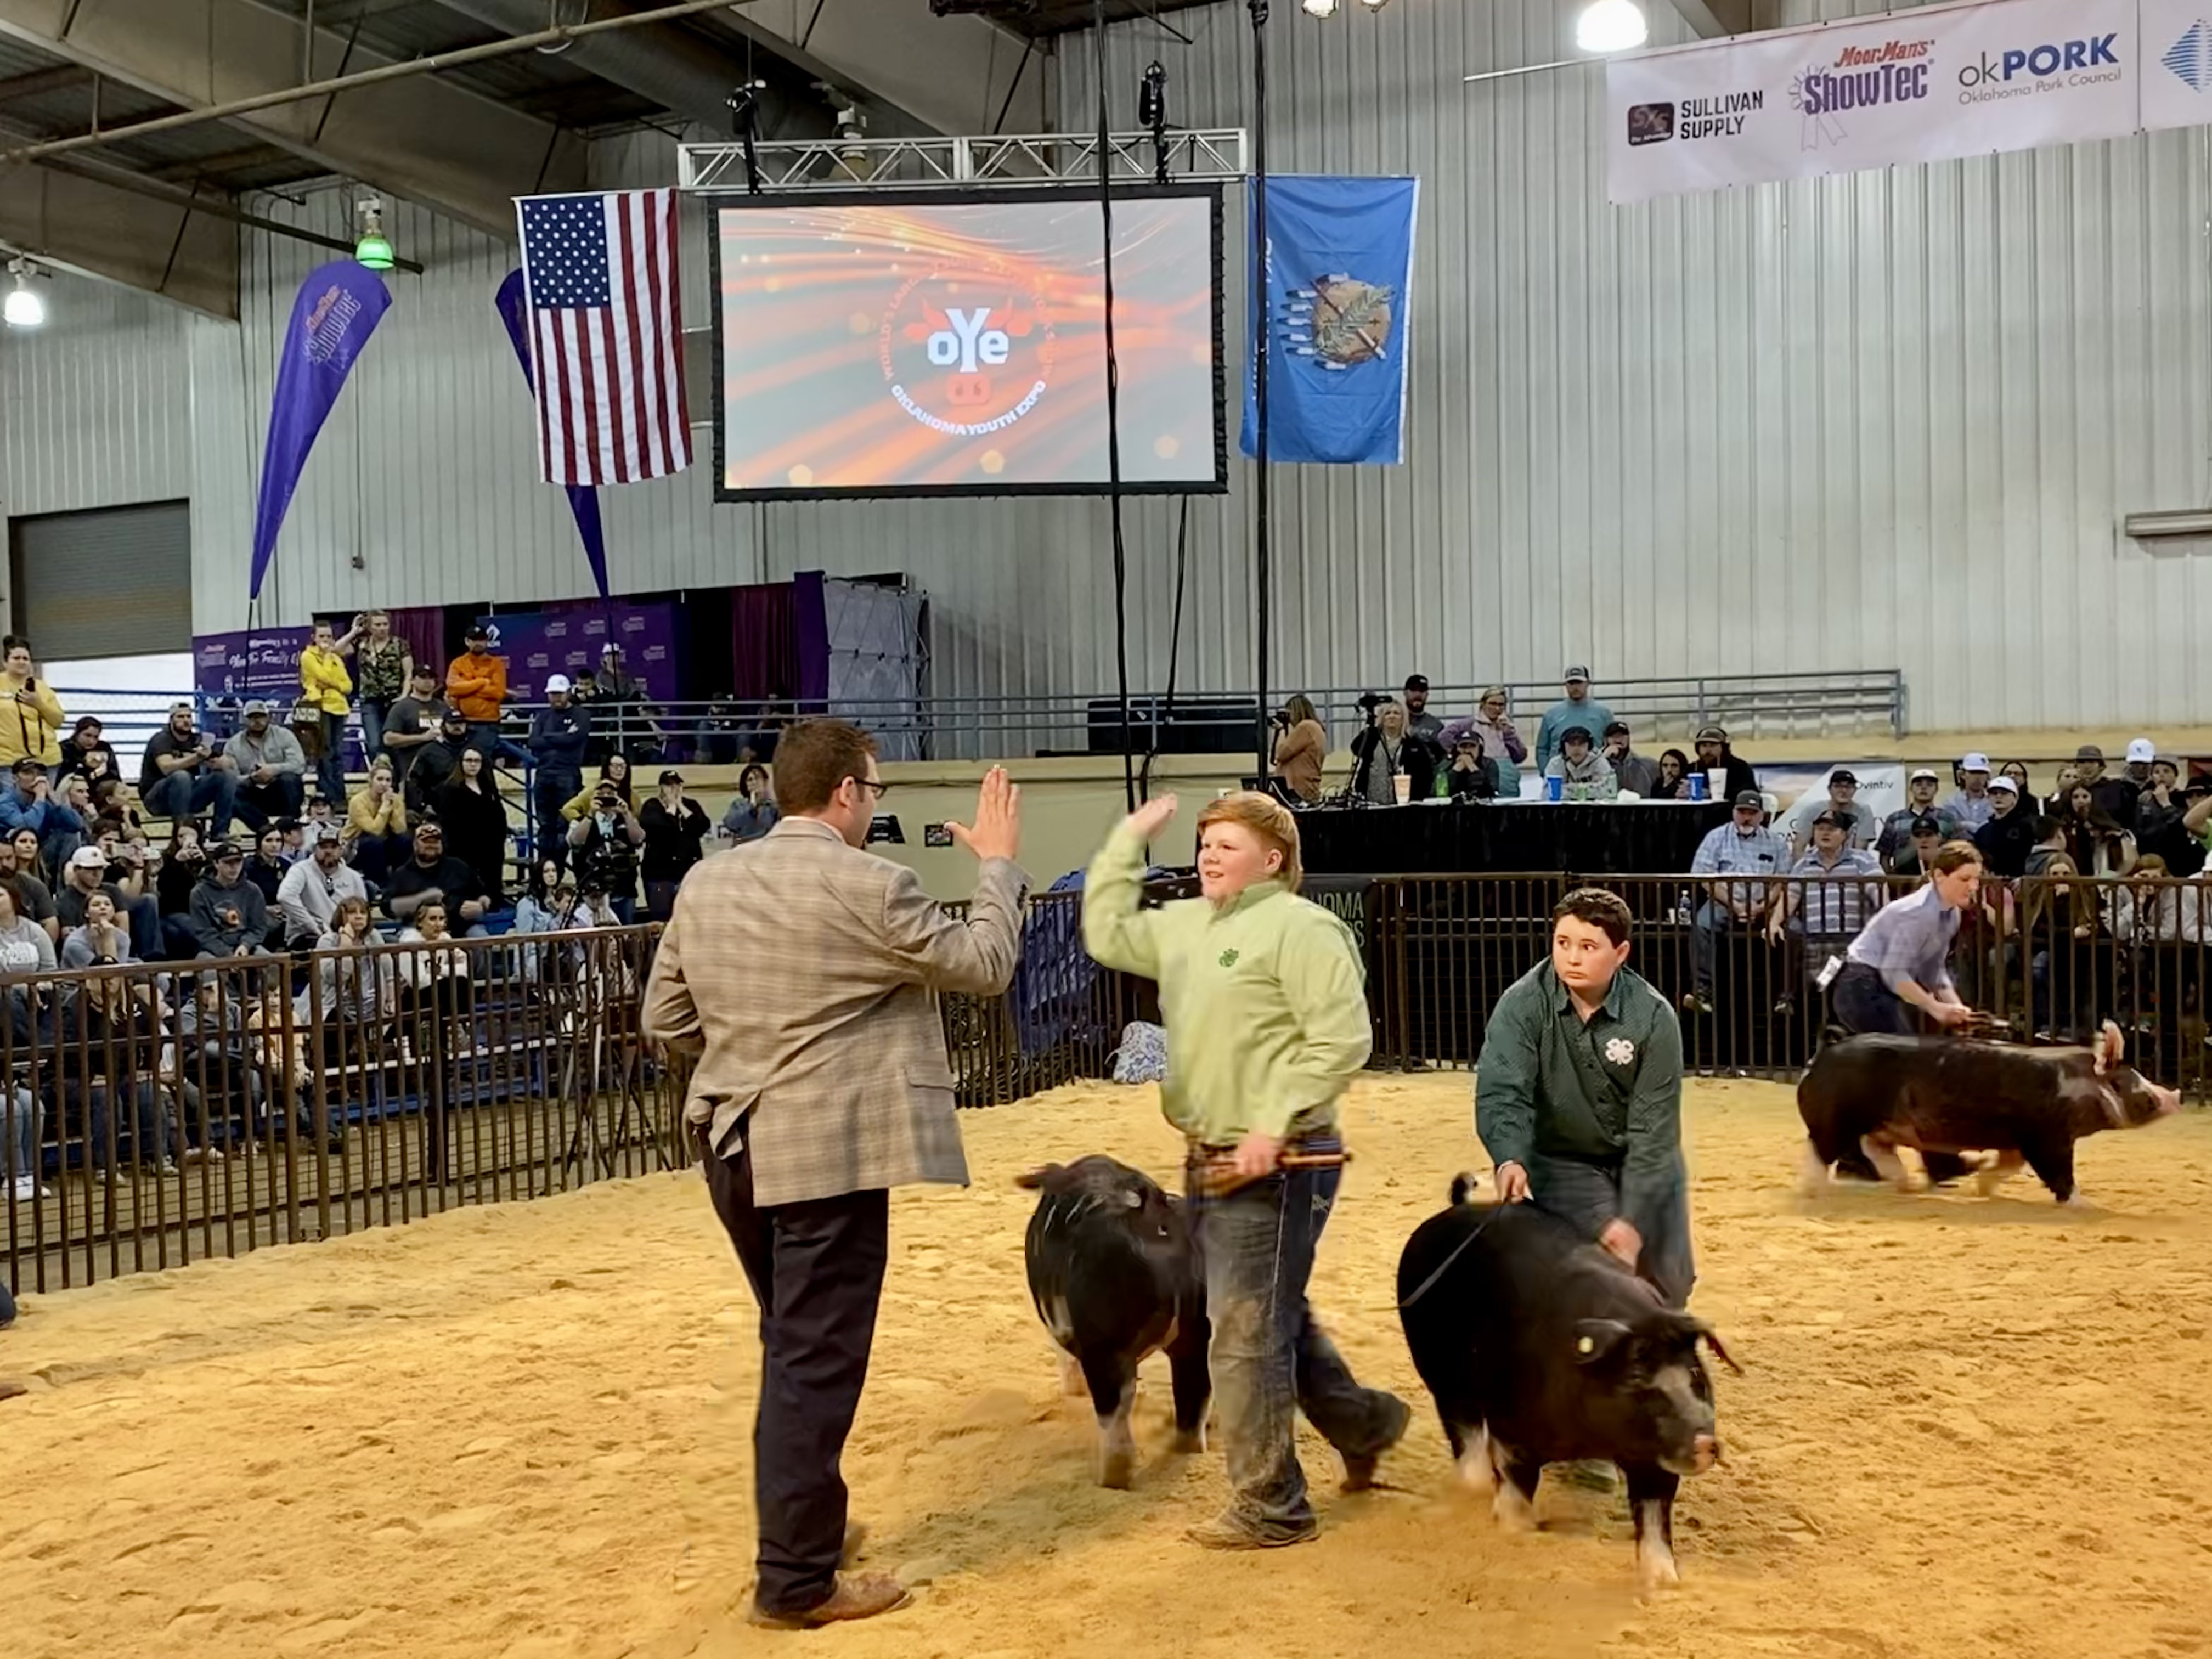 4-Her Gadson Jervis of Blanchard Takes Supreme Purebred Gilt Title with His Champion Spot